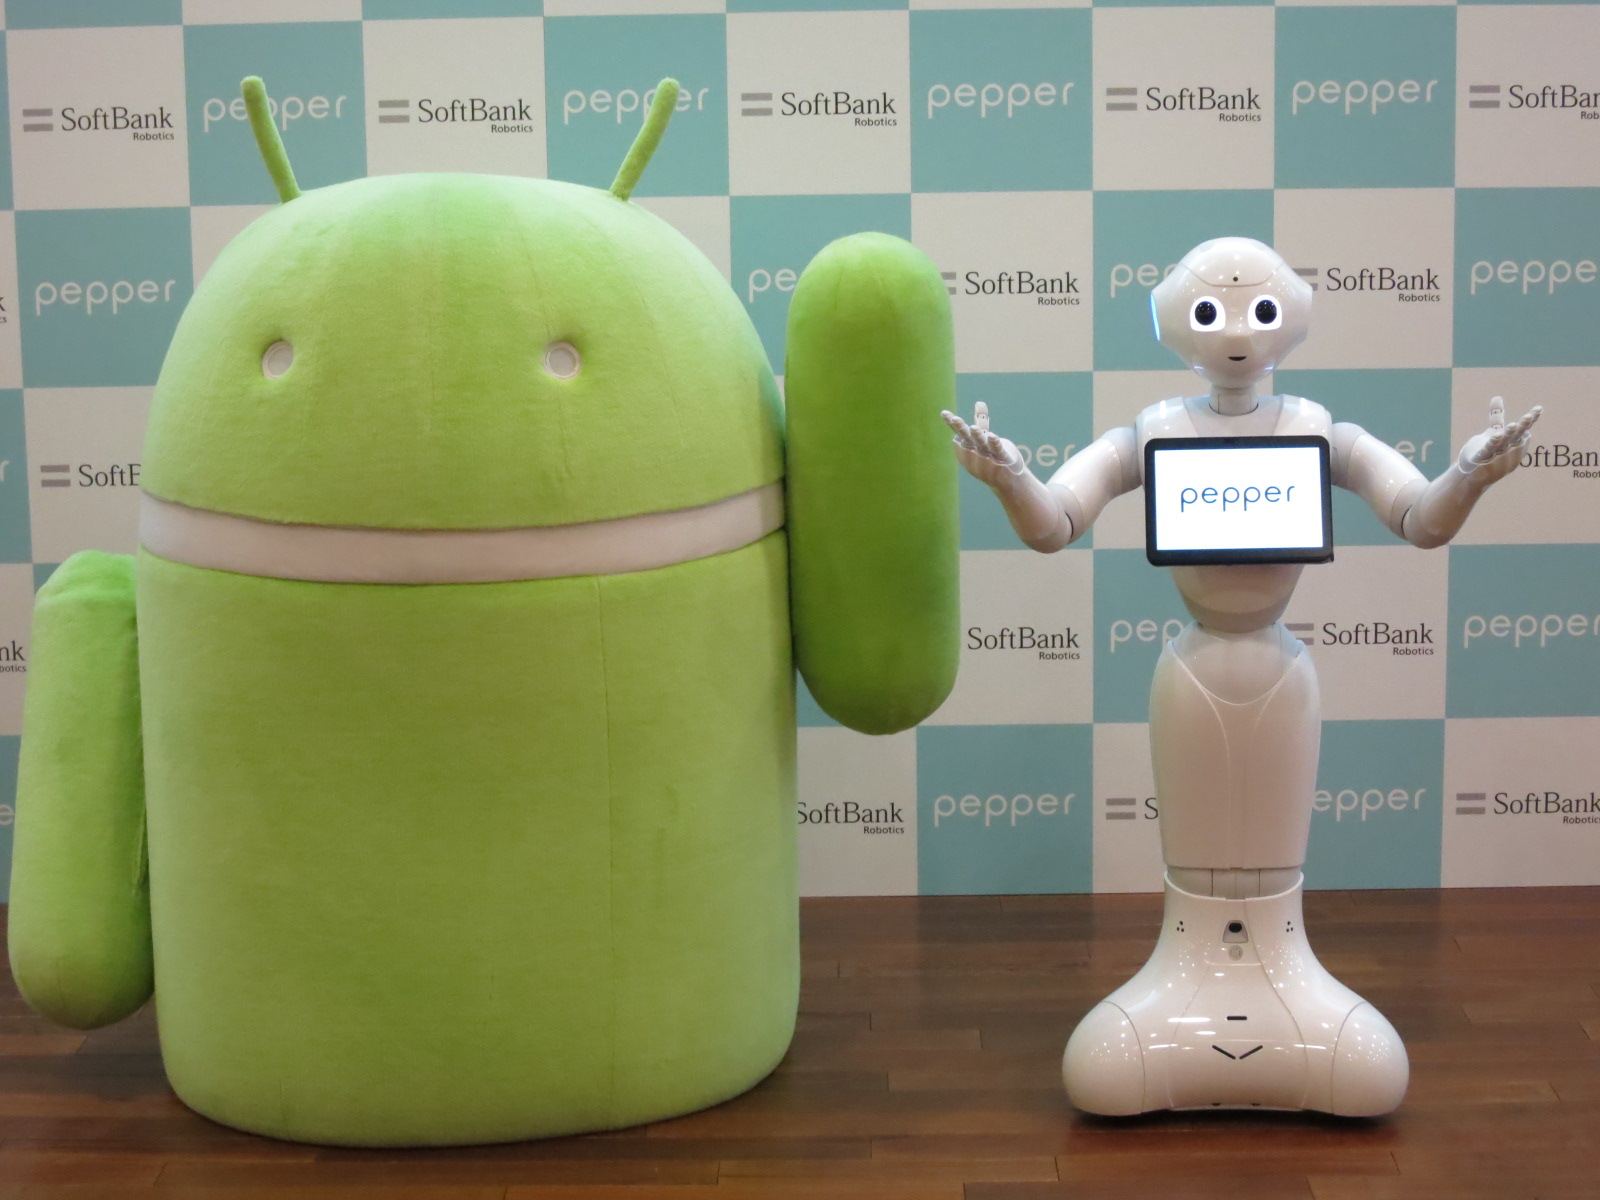 Android's Bugdroid mascot (left) poses with SoftBank Corp.'s Pepper robot at the company's headquarters in Tokyo on Thursday. The event was held to demonstrate Pepper's compatibility with Android software. | KAZUAKI NAGATA